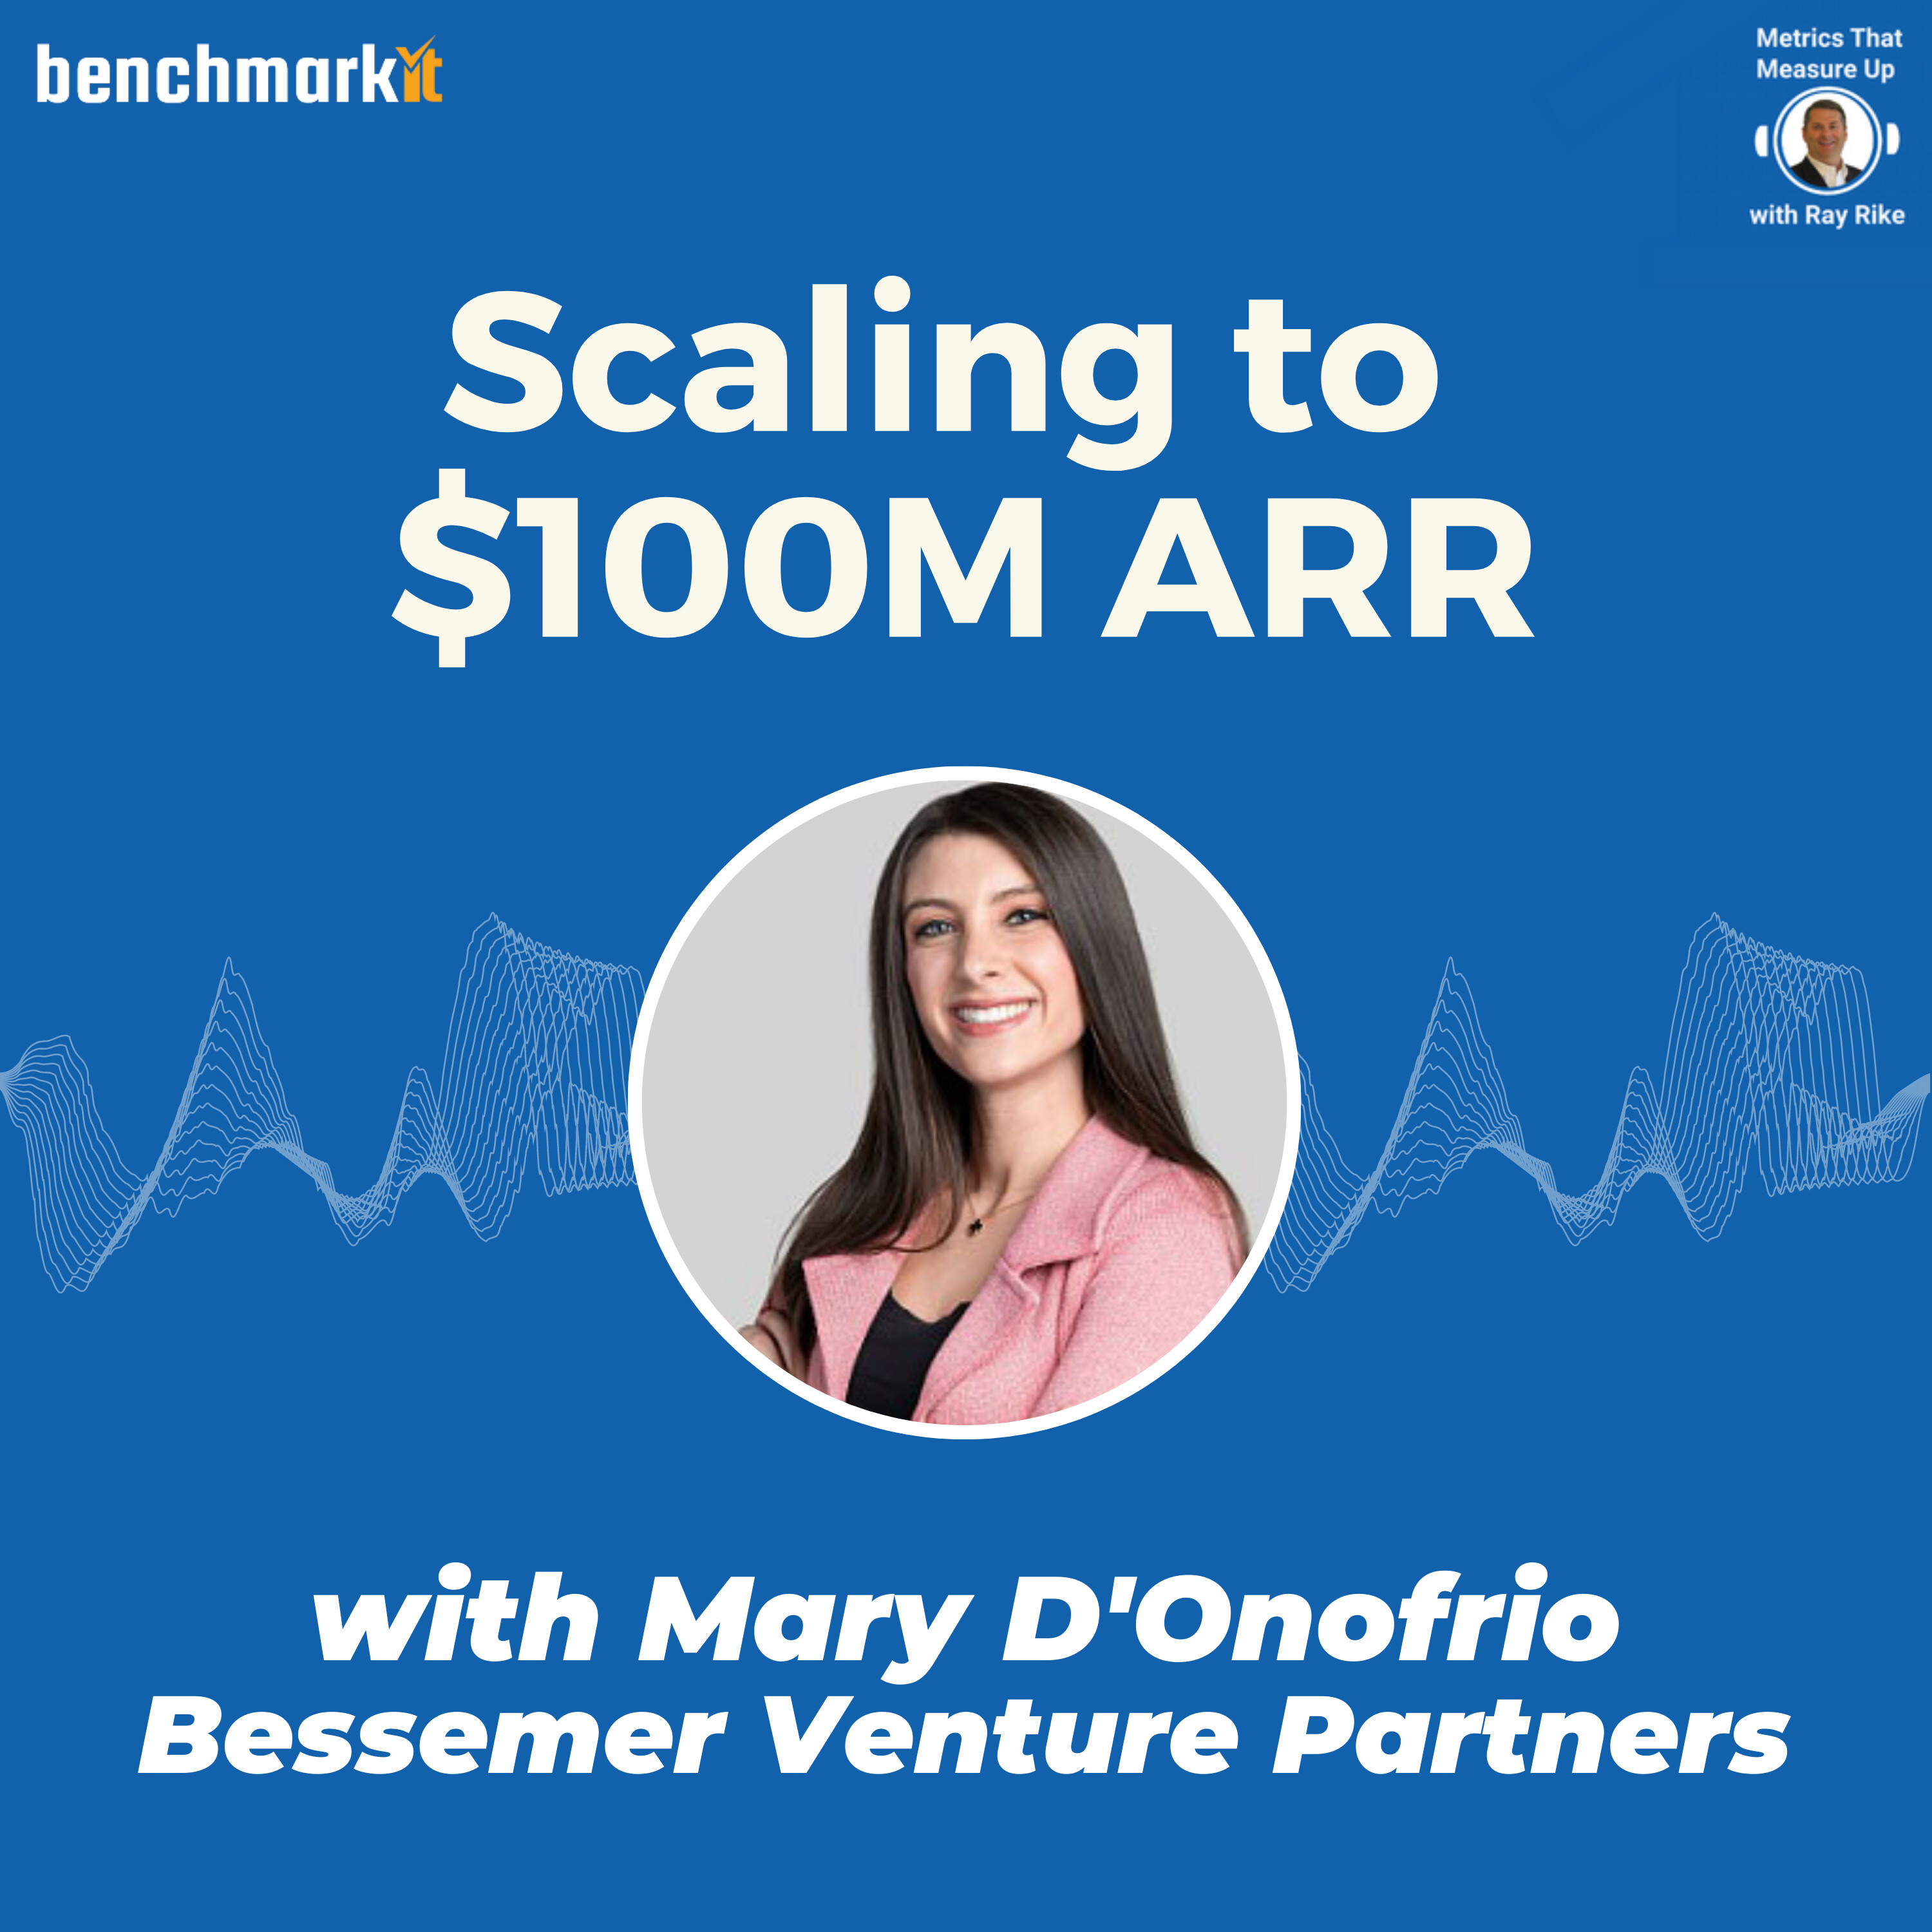 Scaling to $100M ARR - B2B Cloud Benchmarks with Mary D'Onofrio, Partner Bessemer Ventures